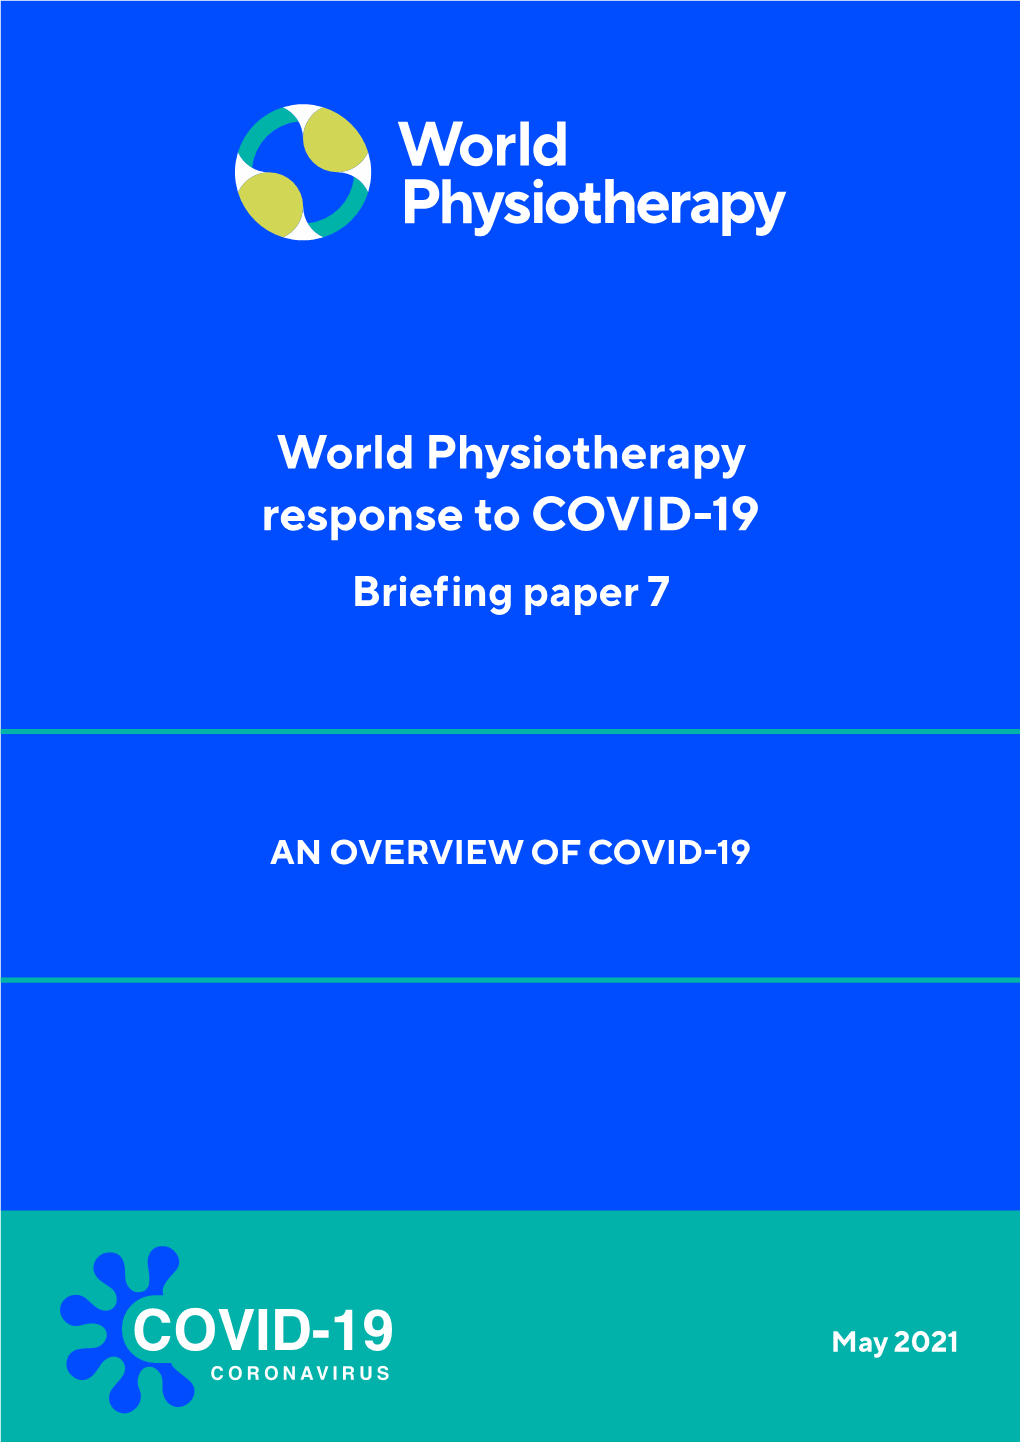 World Physiotherapy Response to COVID-19 Briefing Paper 7